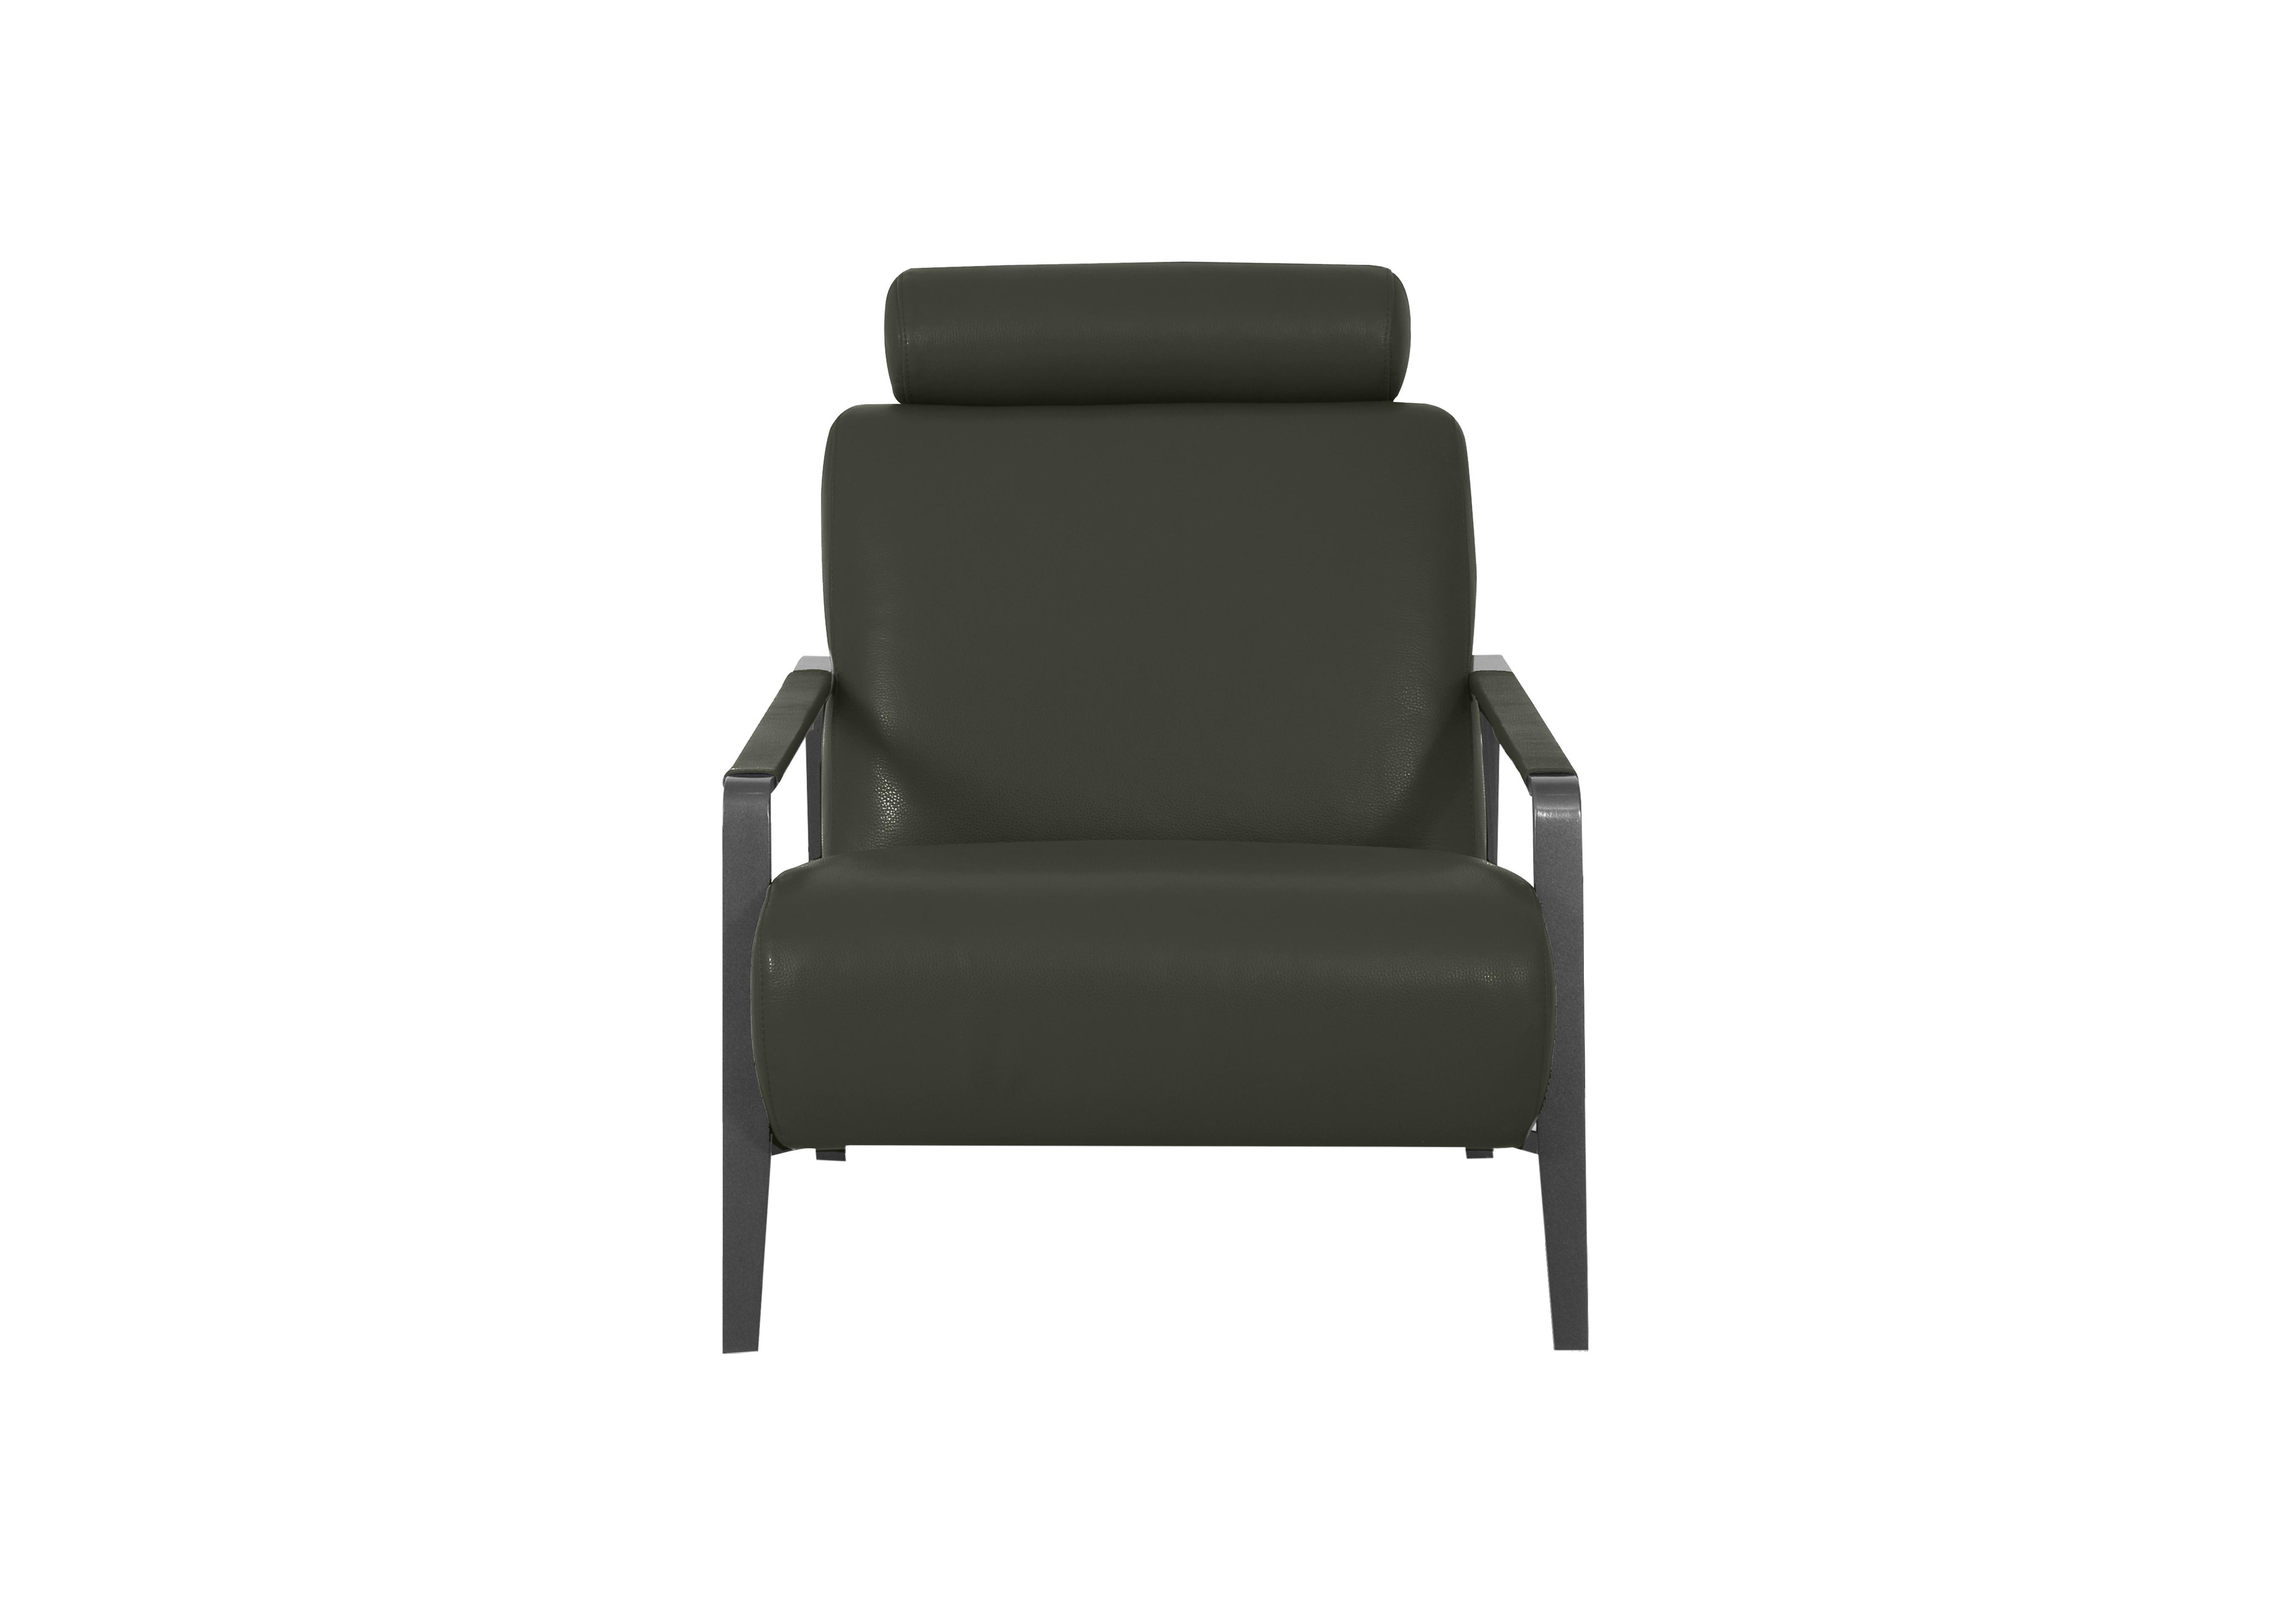 Lawson Leather Accent Chair in Np-548e Dark Olive on Furniture Village